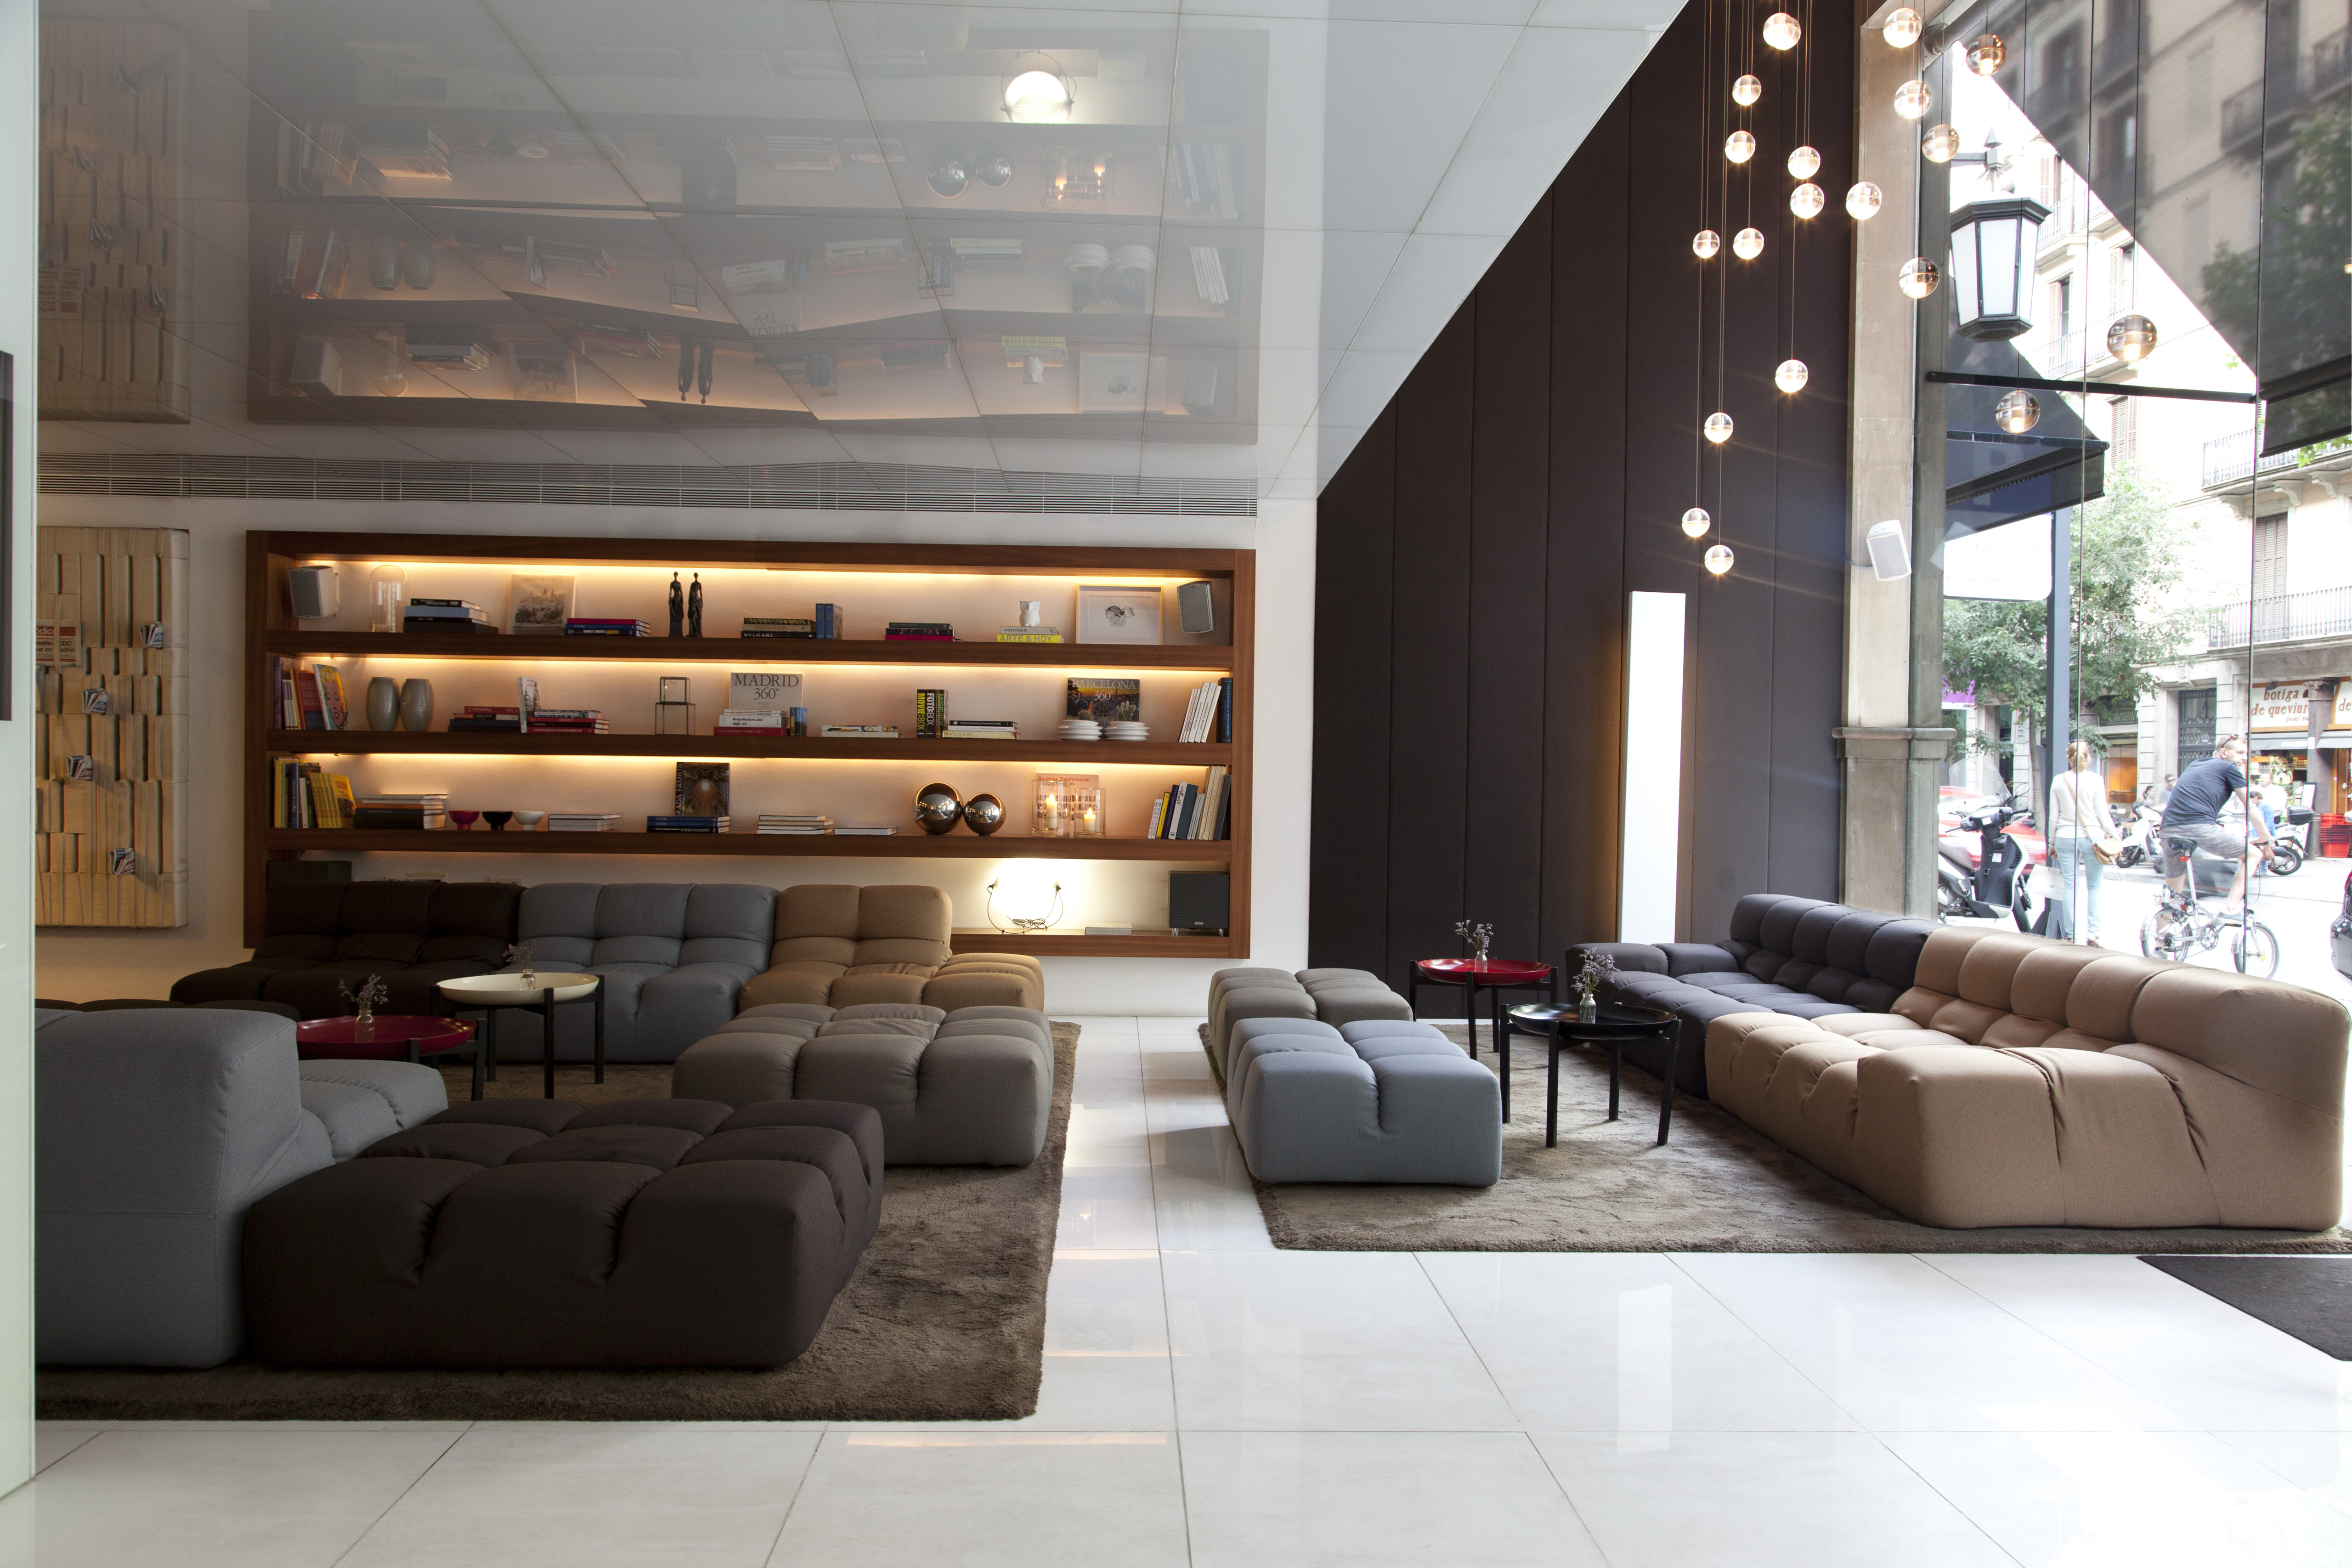 Lobby With Illuminated Shelves, Soft Seating and Decorative Lighting in Lobby Lounge Area by Large Window With View of People on the Street